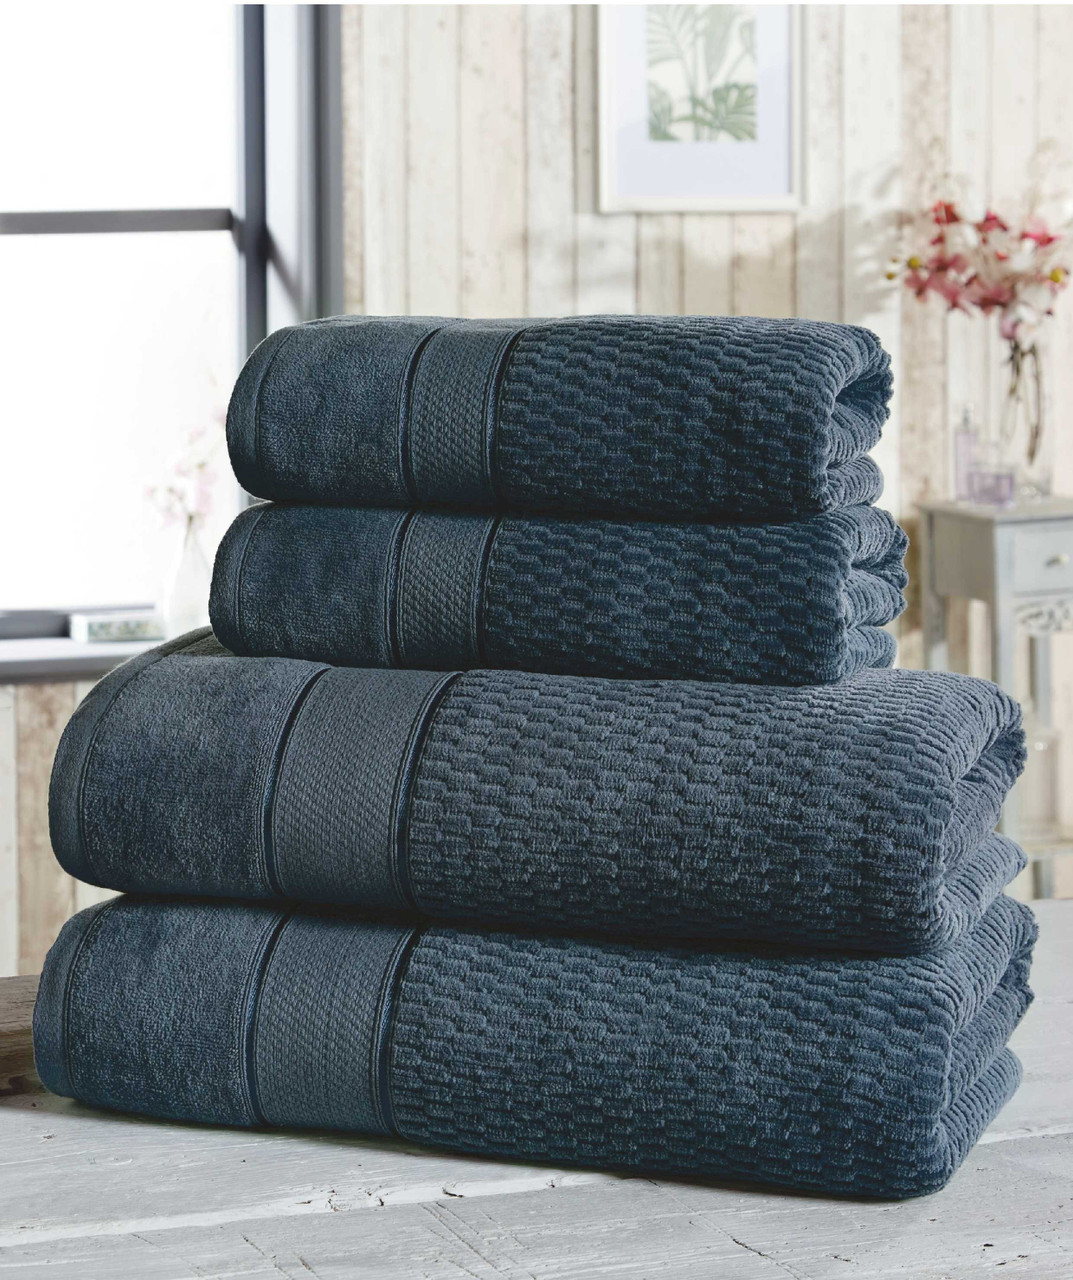 Royal Velvet - Treat yourself with our luxuriously soft bath towels.